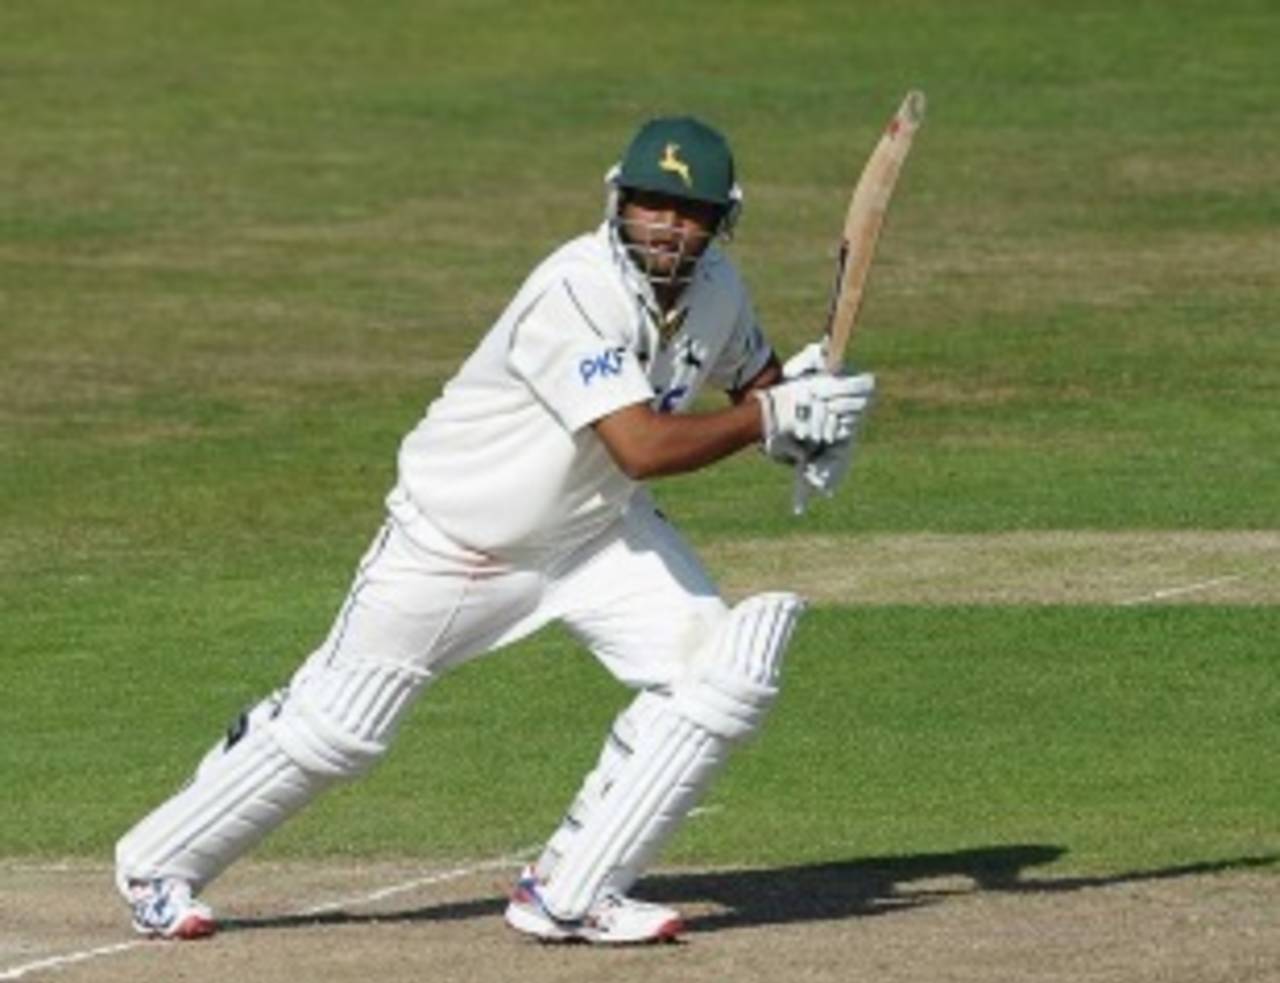 Samit Patel played an important hand after early wickets fell, Nottinghamshire v Worcestershire, County Championship, Division One, Trent Bridge, April 27, 2011